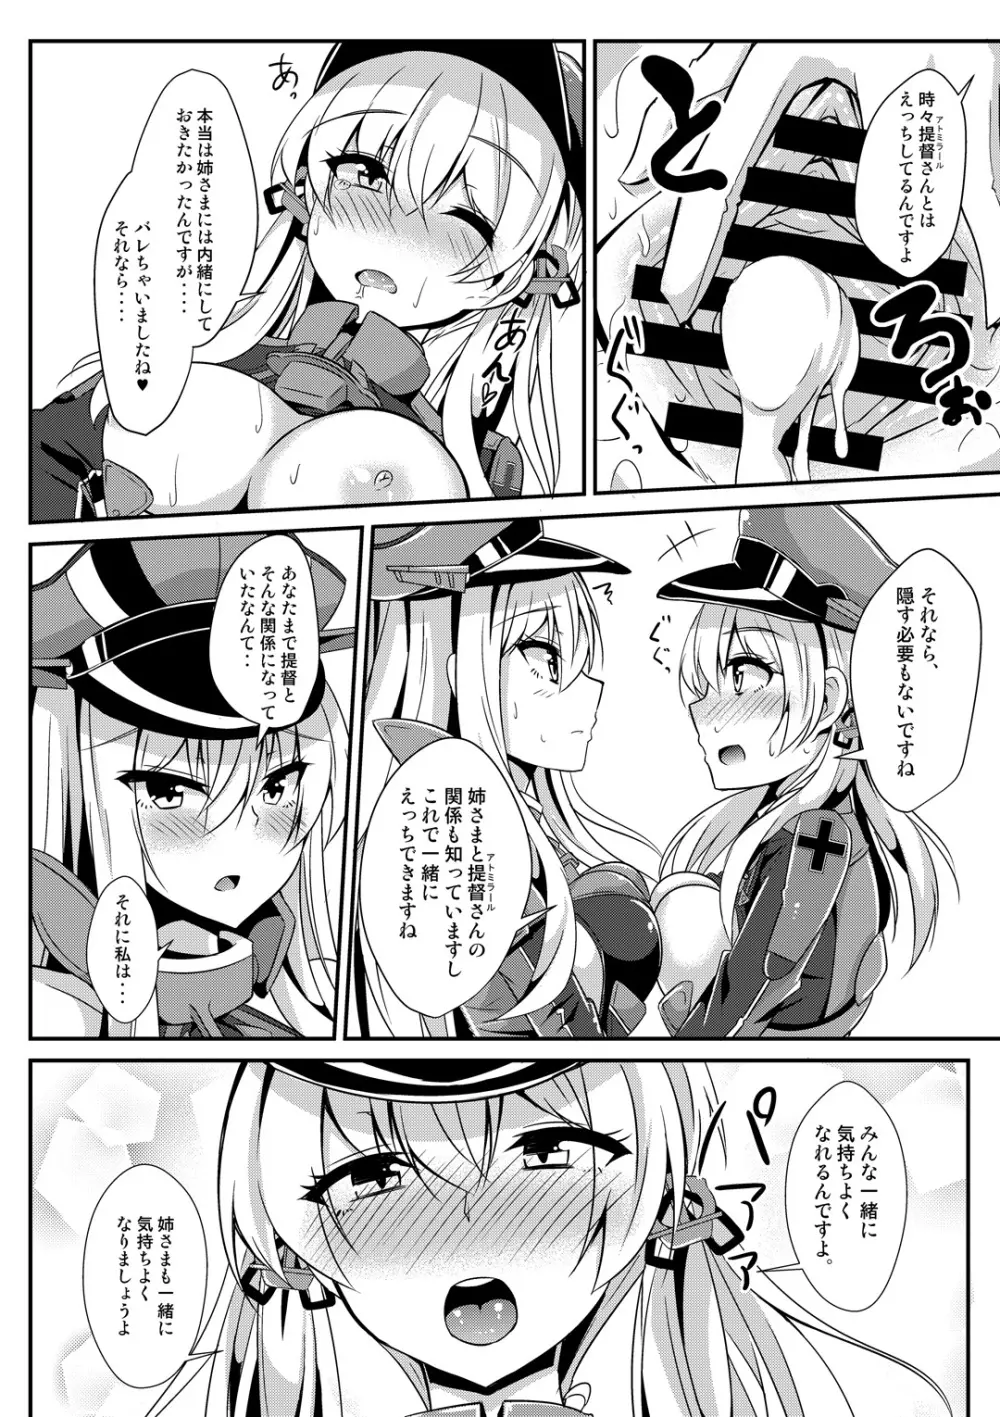 Daily life of admiral and two German ship 提督と二人の日常 15ページ